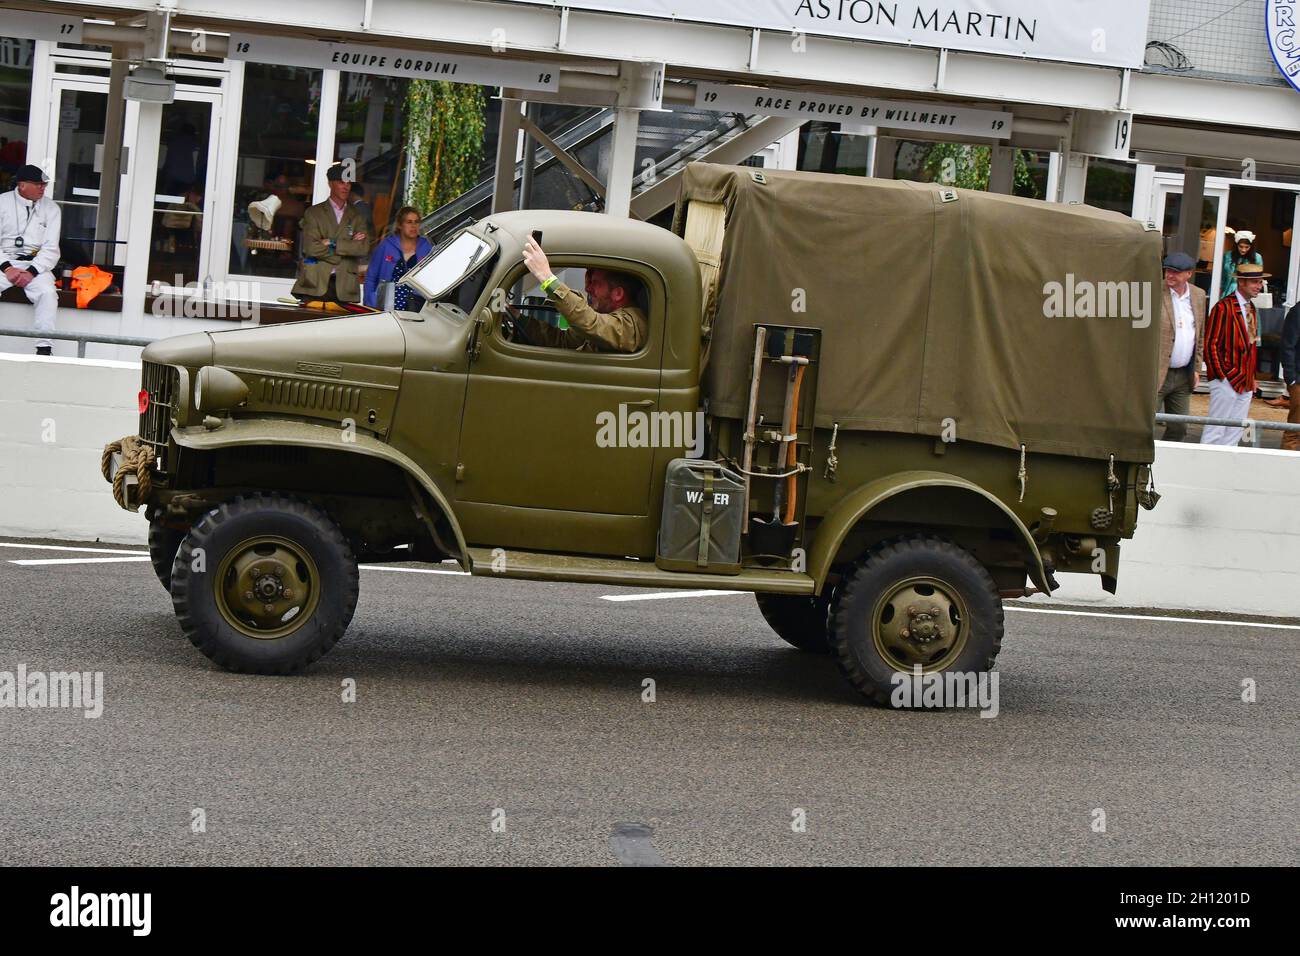 Dodge, Victory Parade, Goodwood Revival 2021, Goodwood, Chichester, West Sussex, England, September 2021. Stock Photo